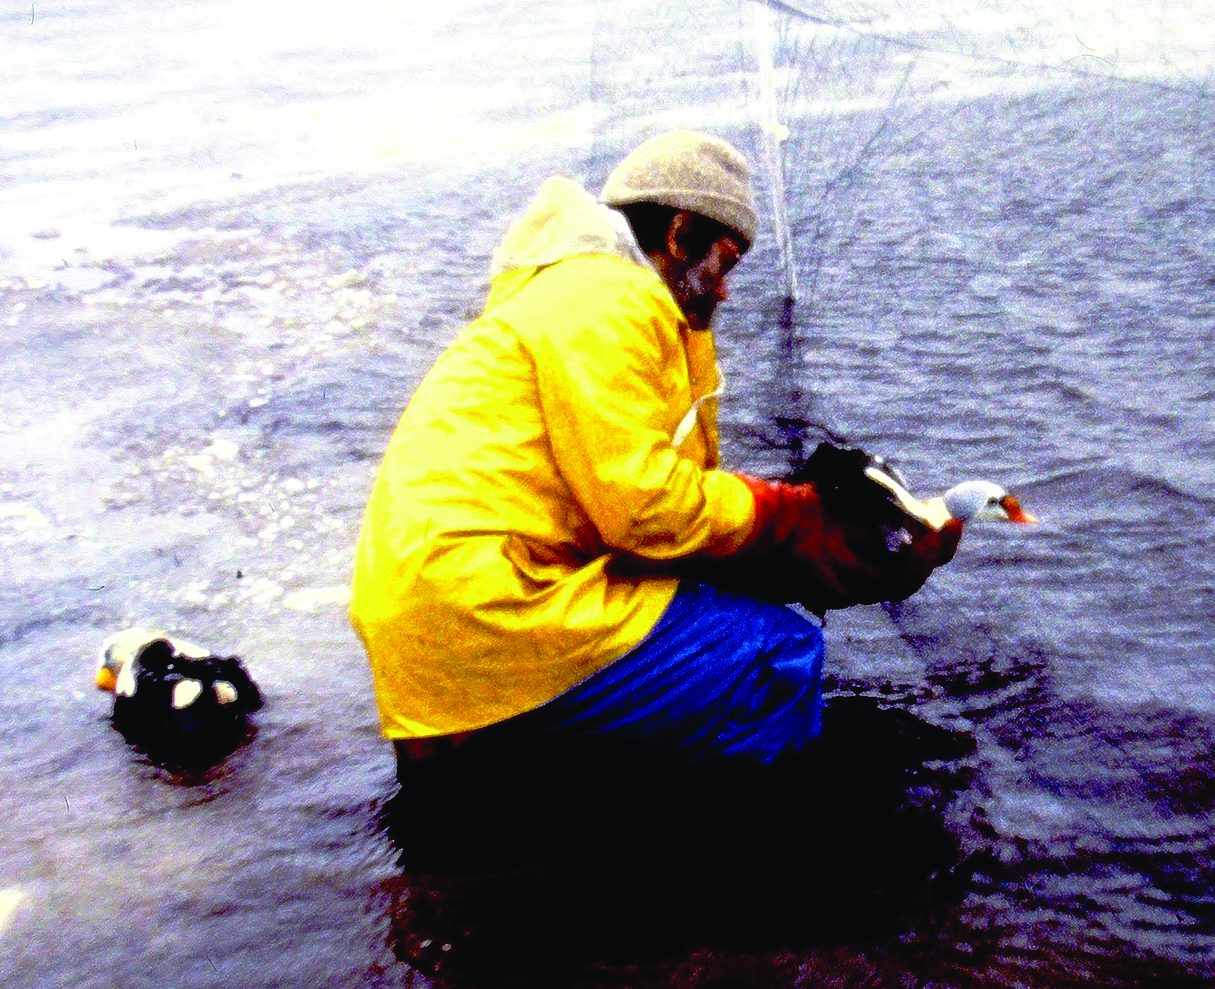 A volunteer wearing a beanie and yellow raincoat squats in oily water and uses gloved hands to remove a dark bodied bird with a white and orange head out of a net.